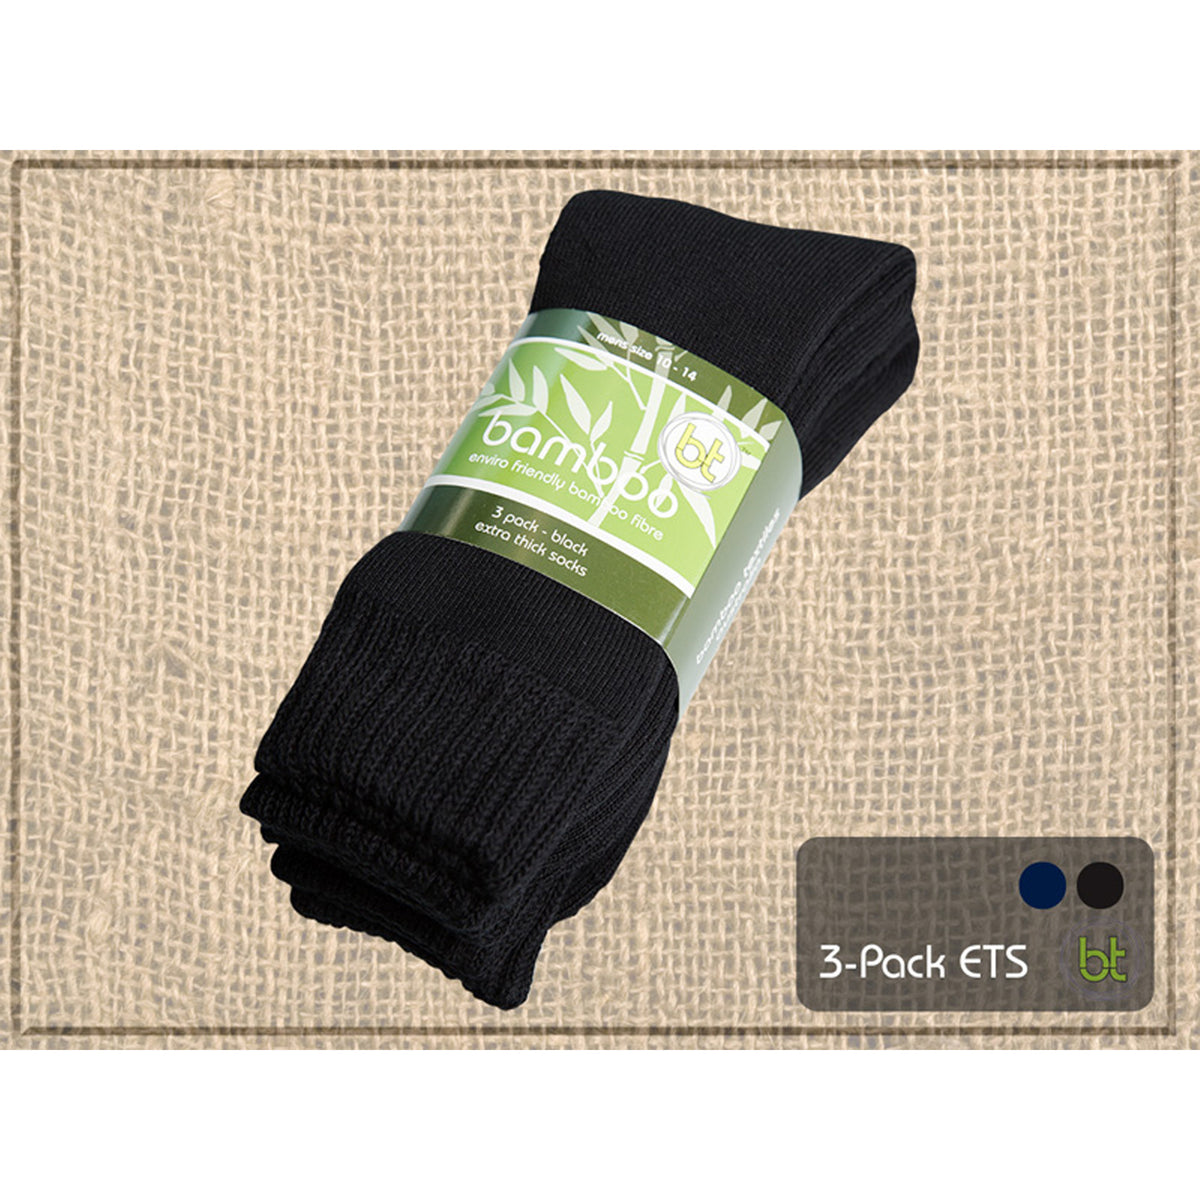 3 pack extra thick bamboo socks in black and navy